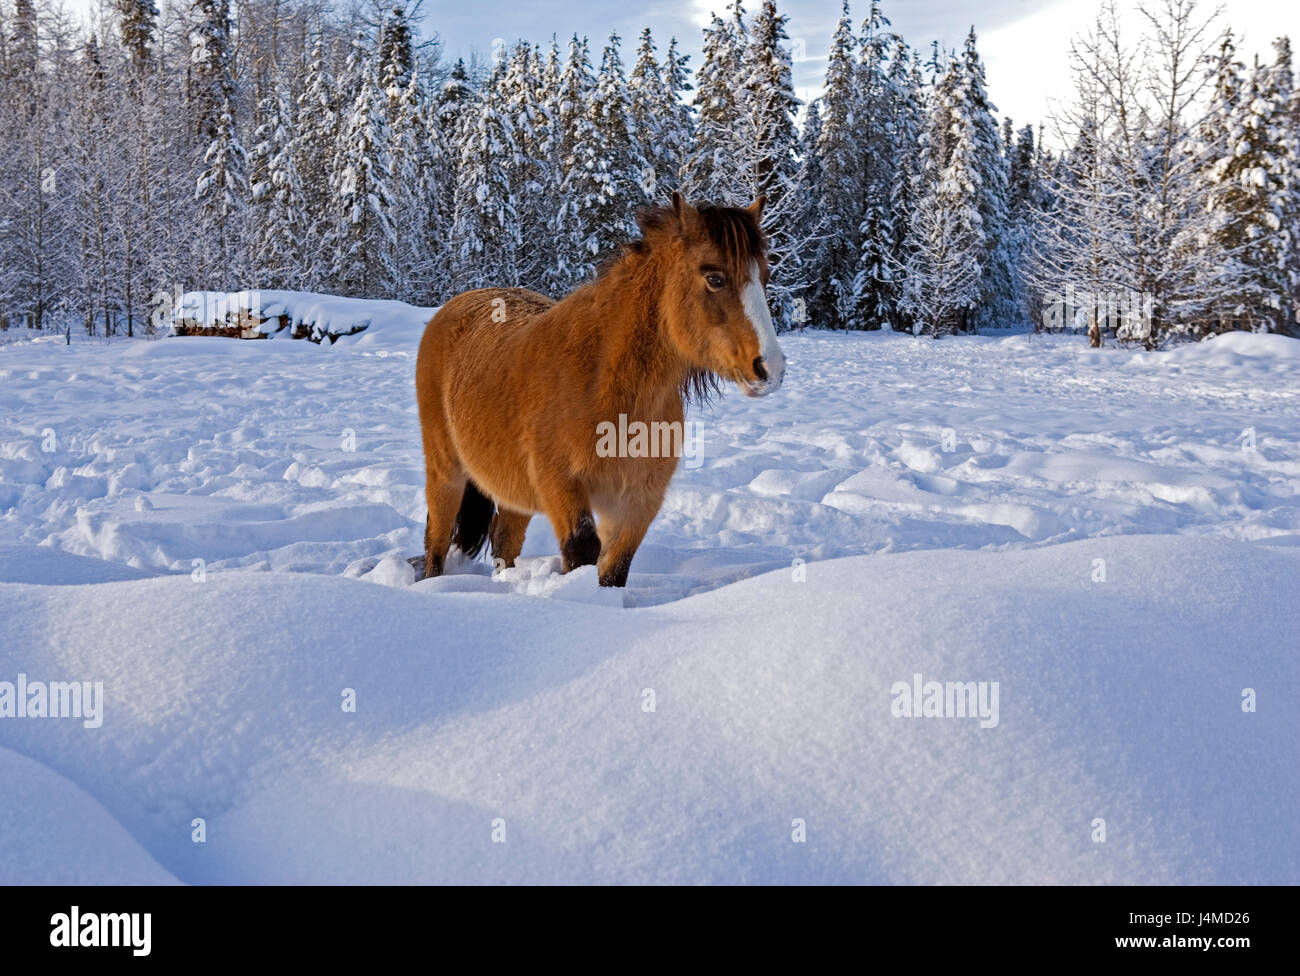 Welsh Mountain Pony standing in snow at winter pasture Stock Photo